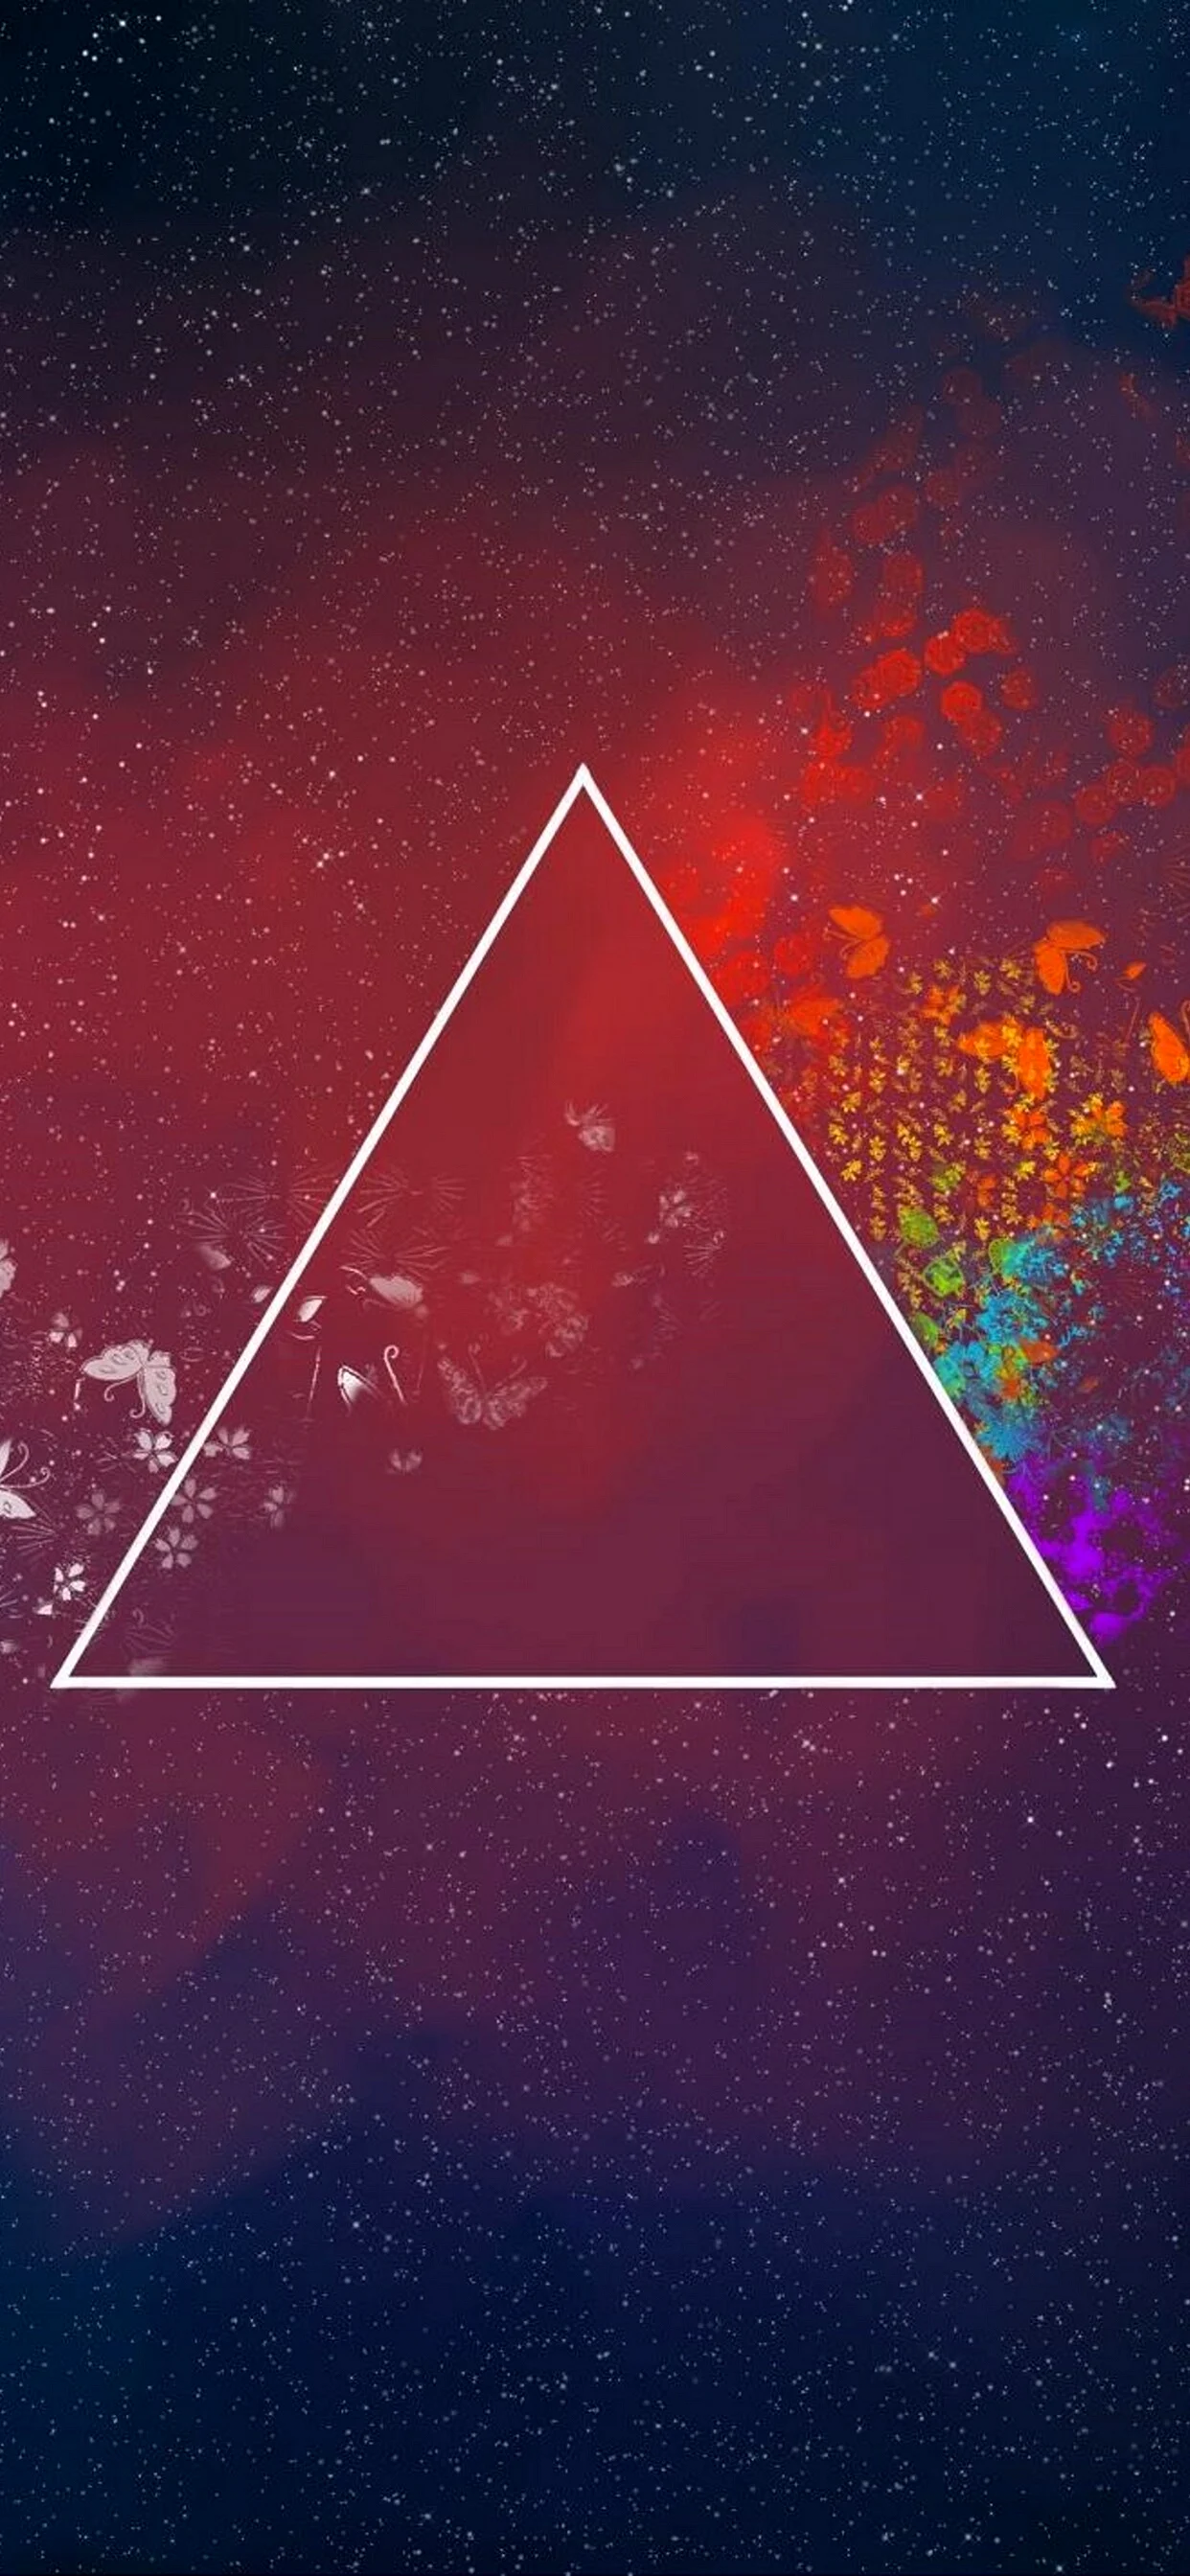 Pink Floyd Triangle Wallpaper for iPhone 11 Pro Max